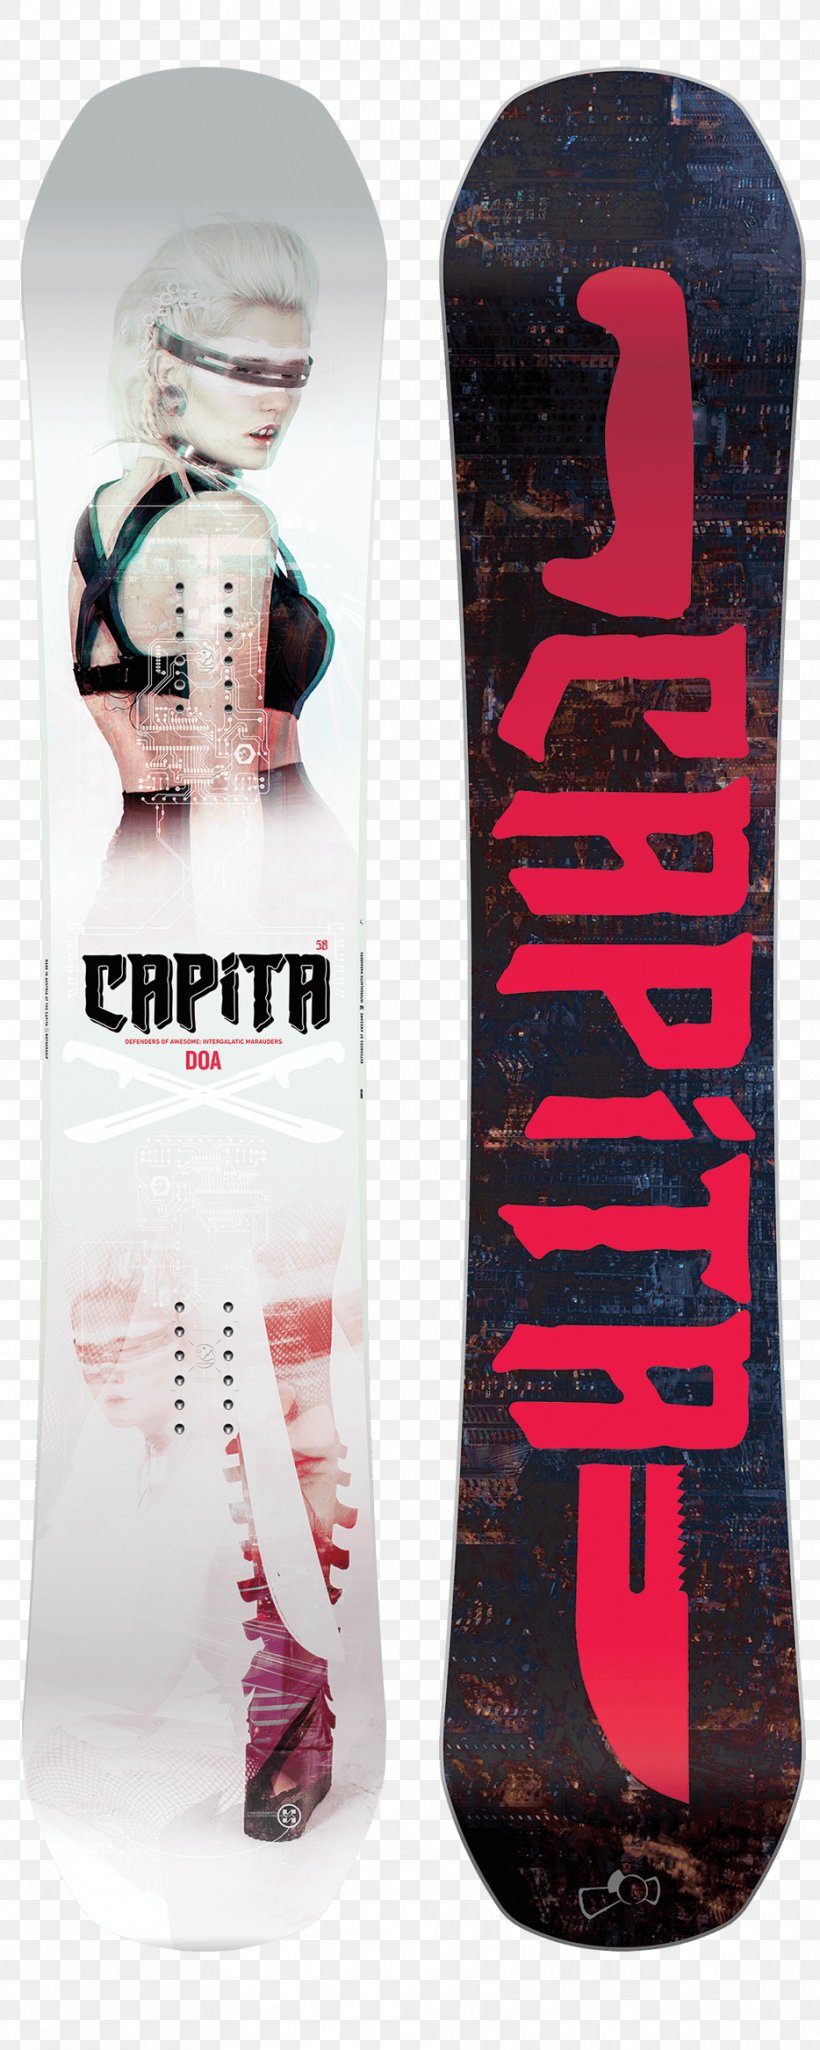 CAPiTA Defenders Of Awesome (2017) Snowboard CAPiTA Defenders Of Awesome (2016) 0, PNG, 934x2335px, 2017, Capita Defenders Of Awesome 2017, Burton Snowboards, Capita, Capita Scott Stevens Pro 2017 Download Free